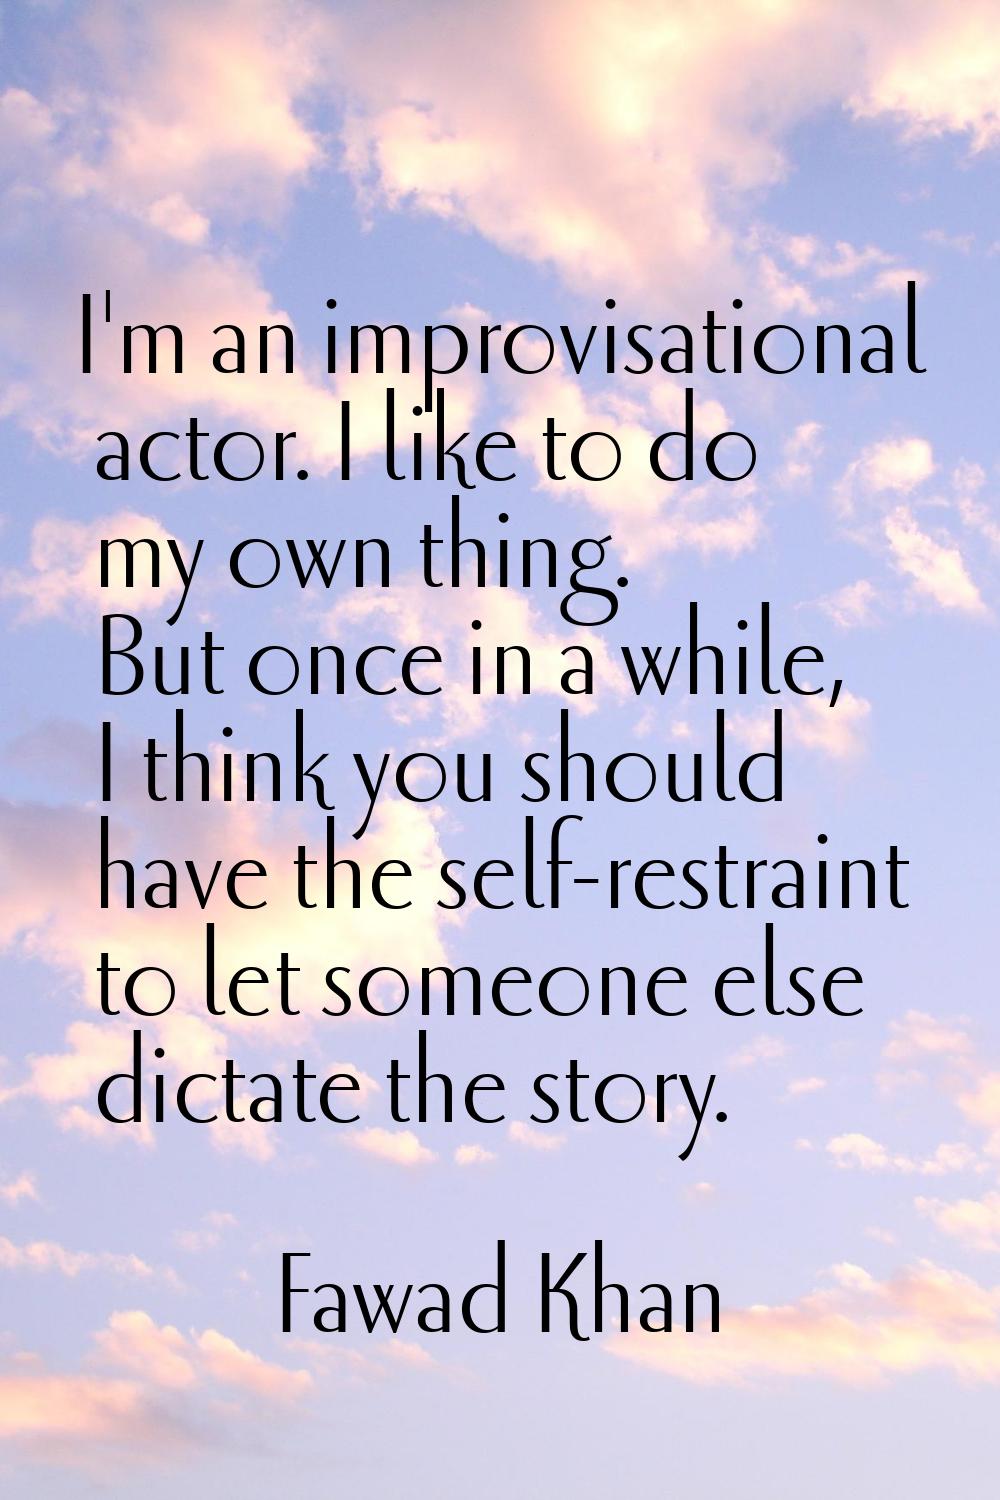 I'm an improvisational actor. I like to do my own thing. But once in a while, I think you should ha